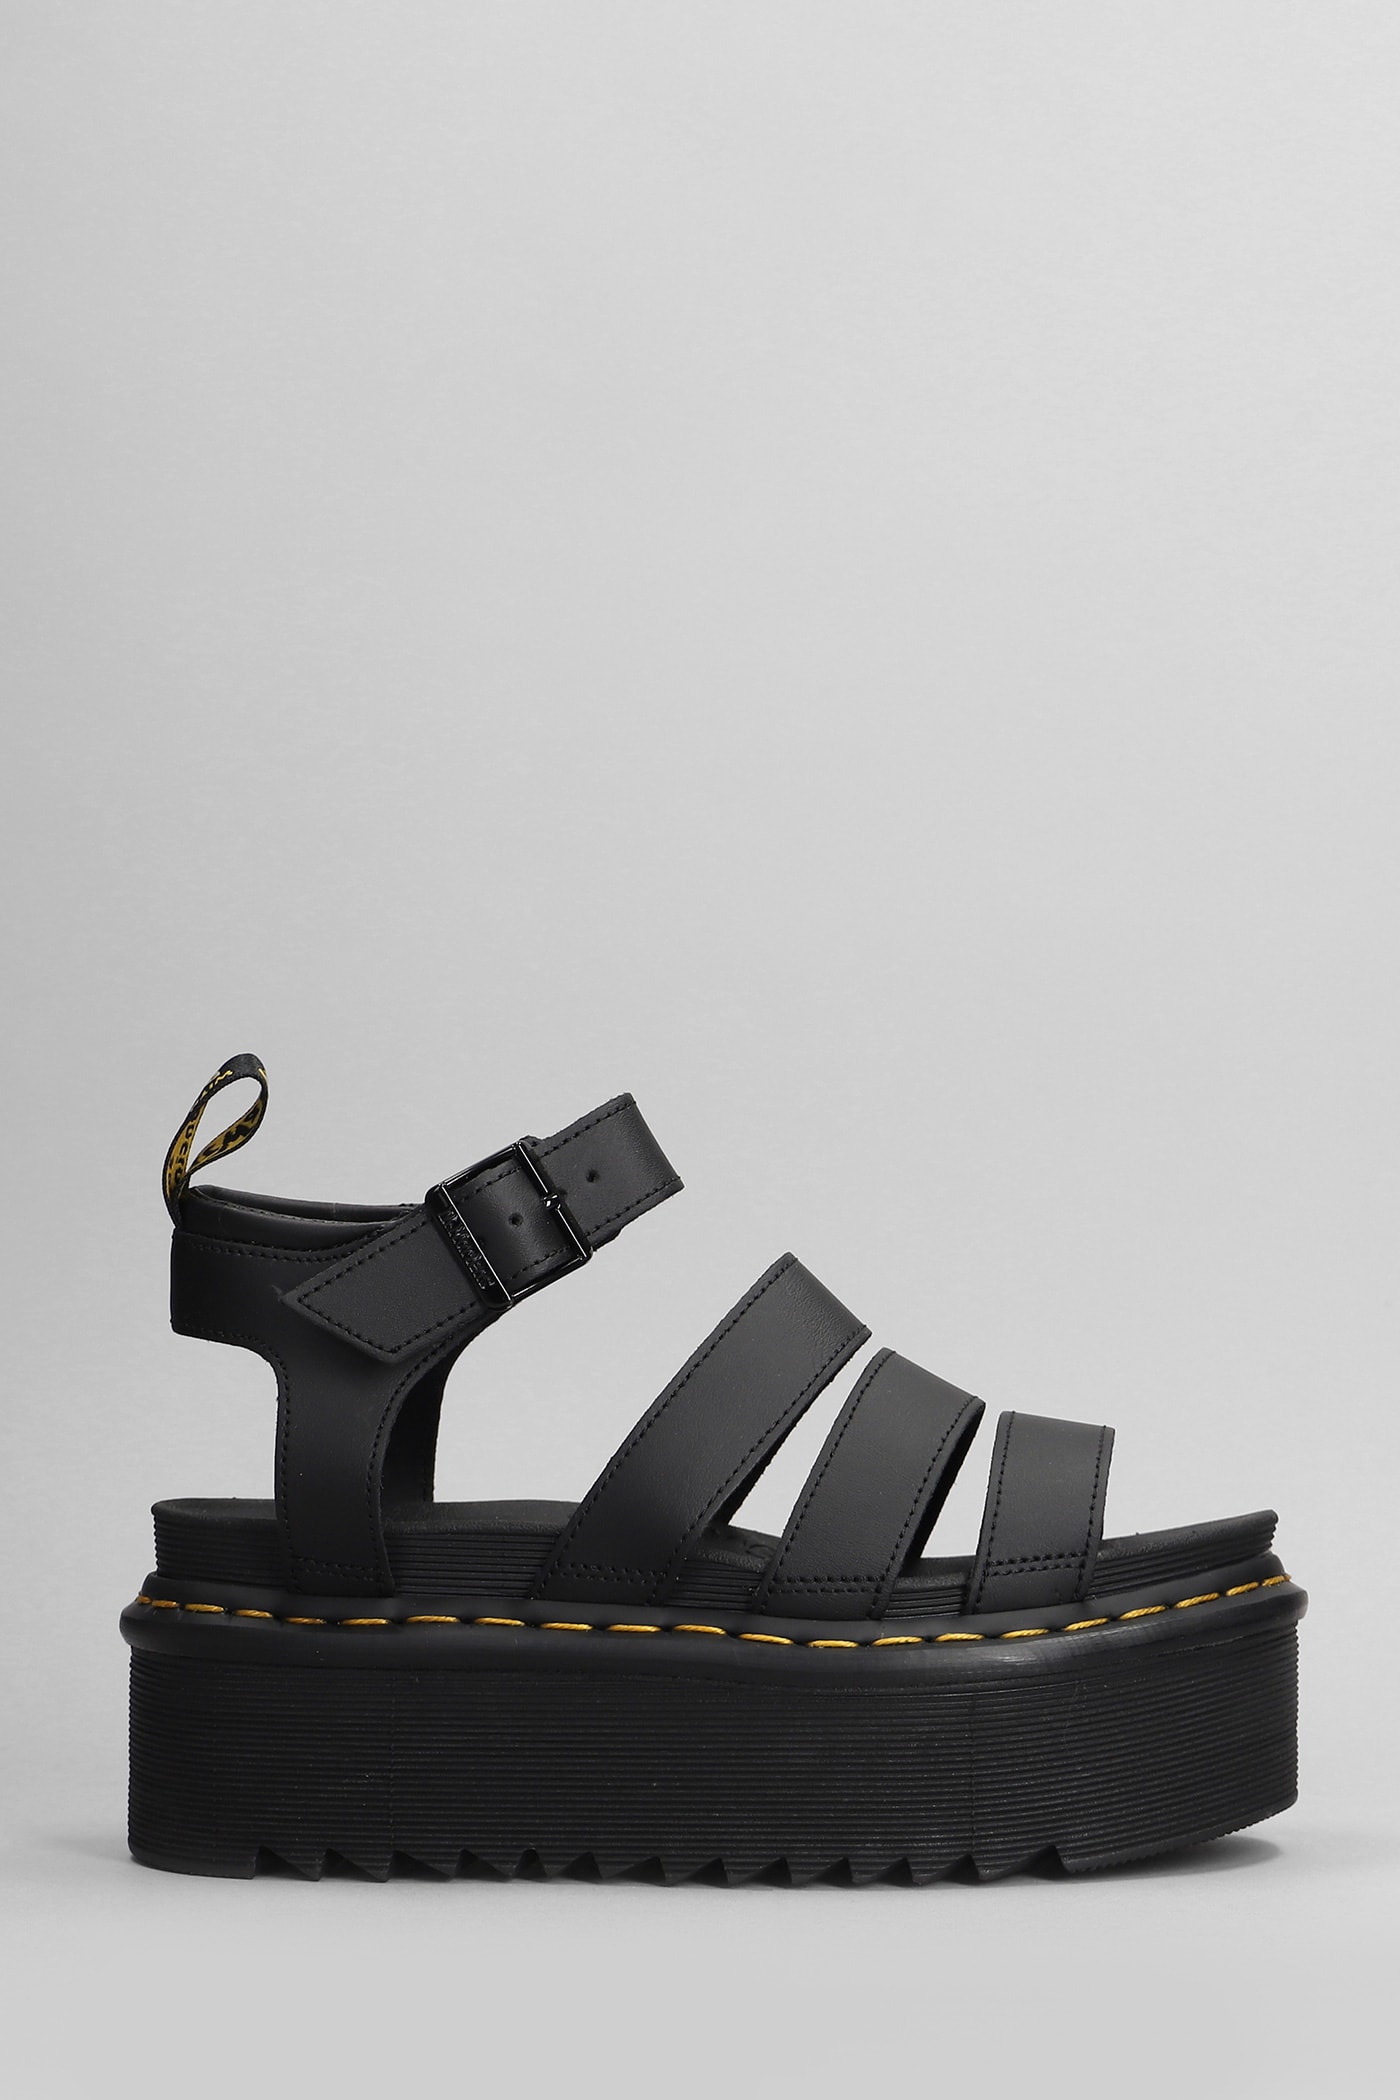 Blaire Quad Wedges In Black Leather